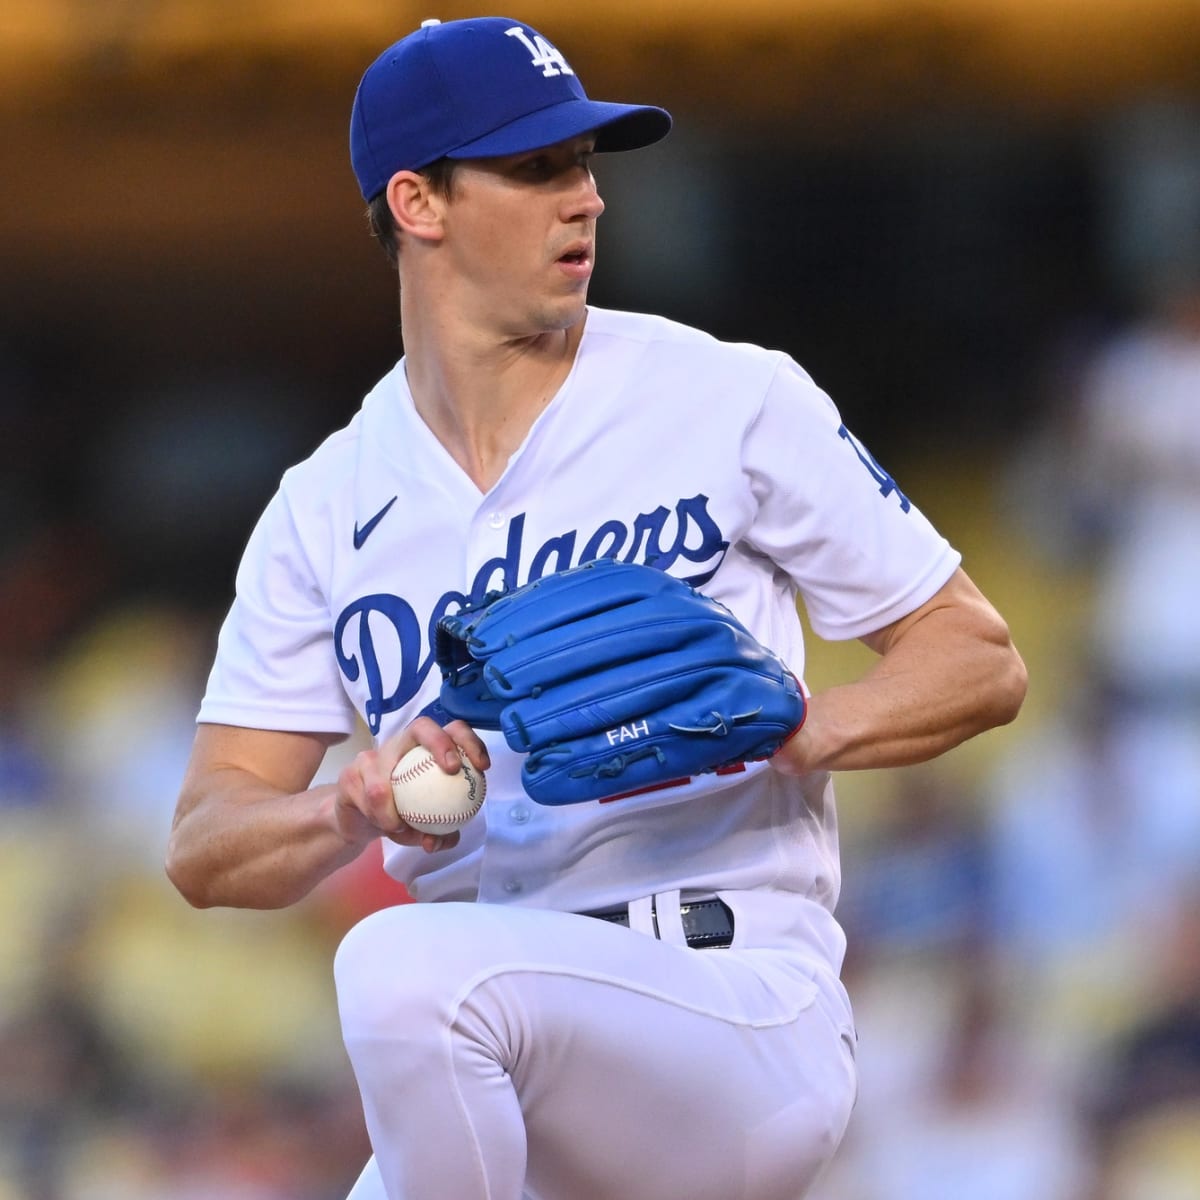 Dodgers sign their top draft pick Walker Buehler, who is reportedly injured  – Daily News